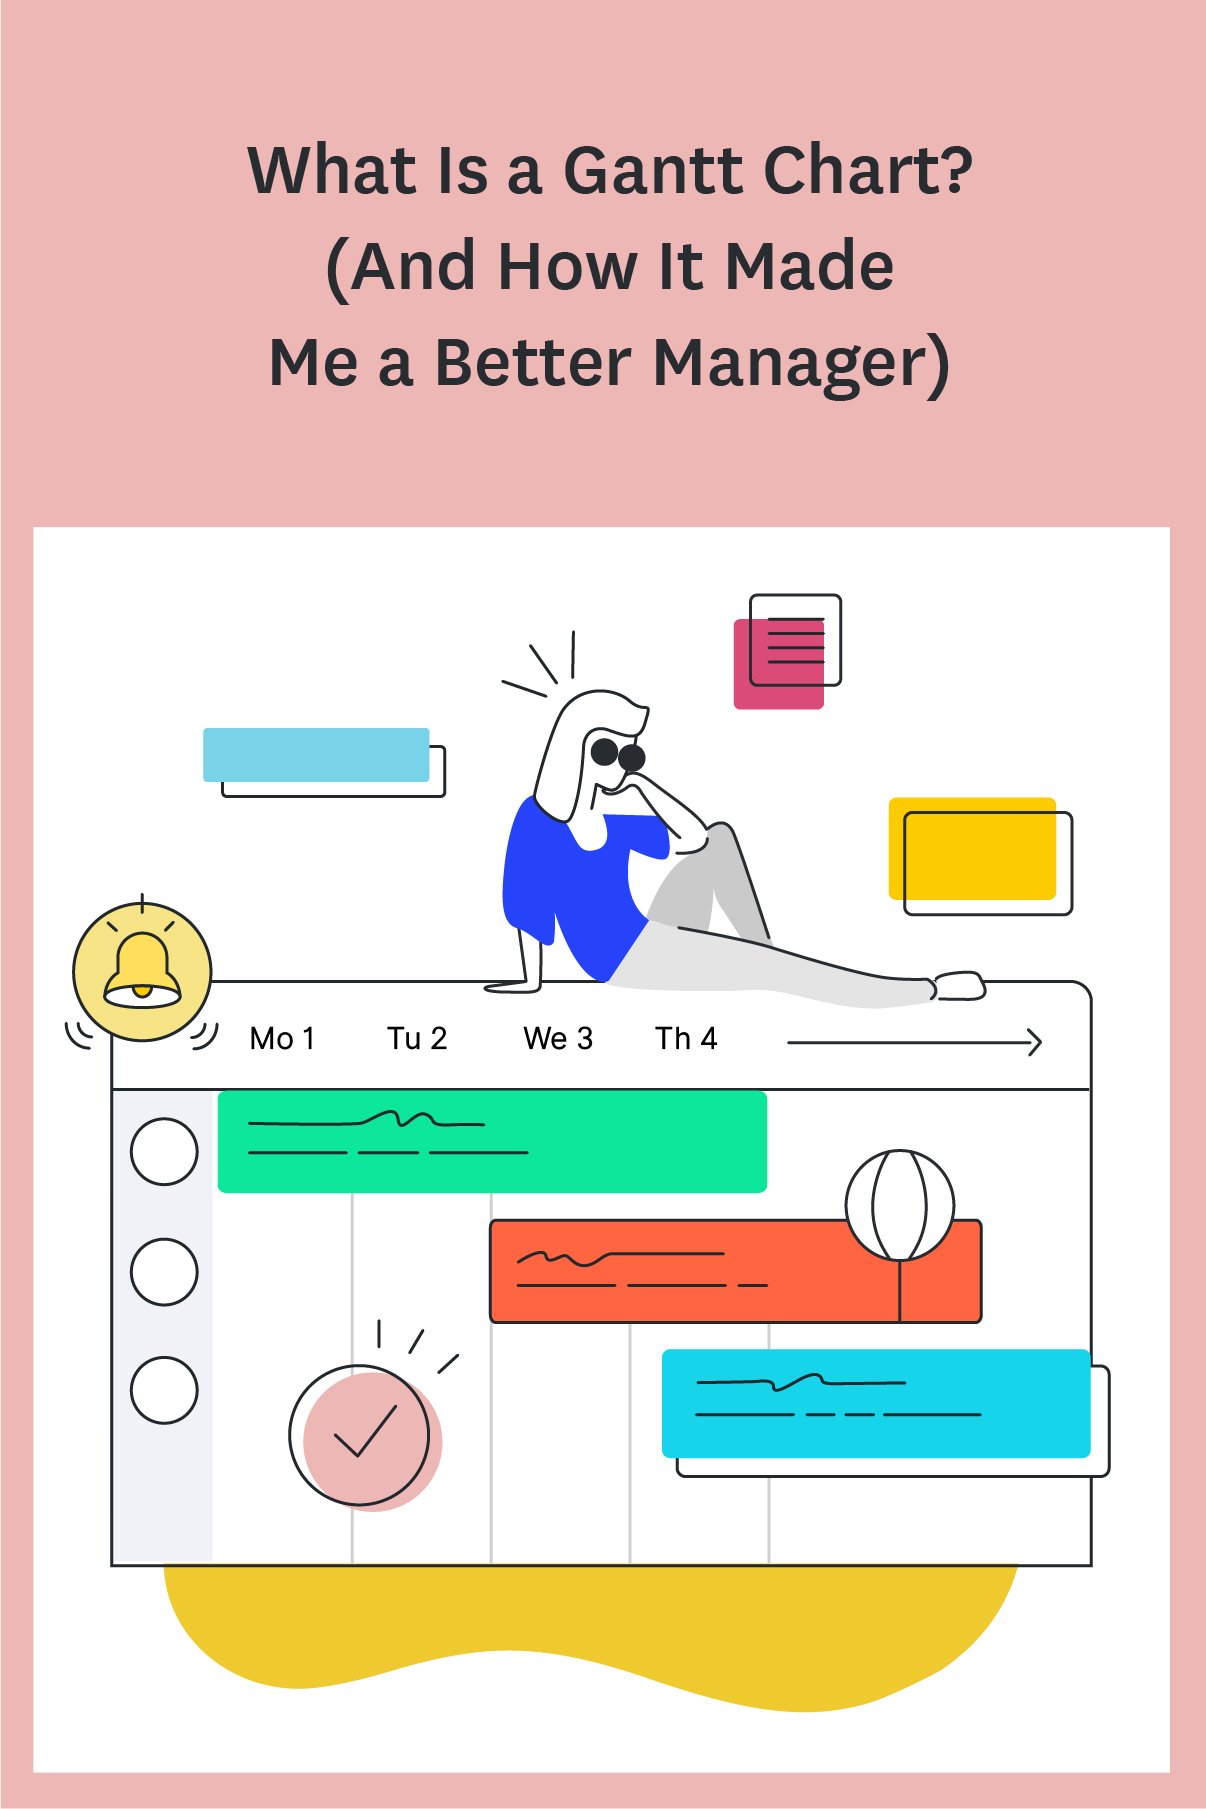 What is a Gantt Chart and how can it help you be a better manager? Find out why a Gantt chart is an excellent tool for team planning and how to use a Gantt chart to manage your team more effectively. #teamlead #managertips #ganttchart